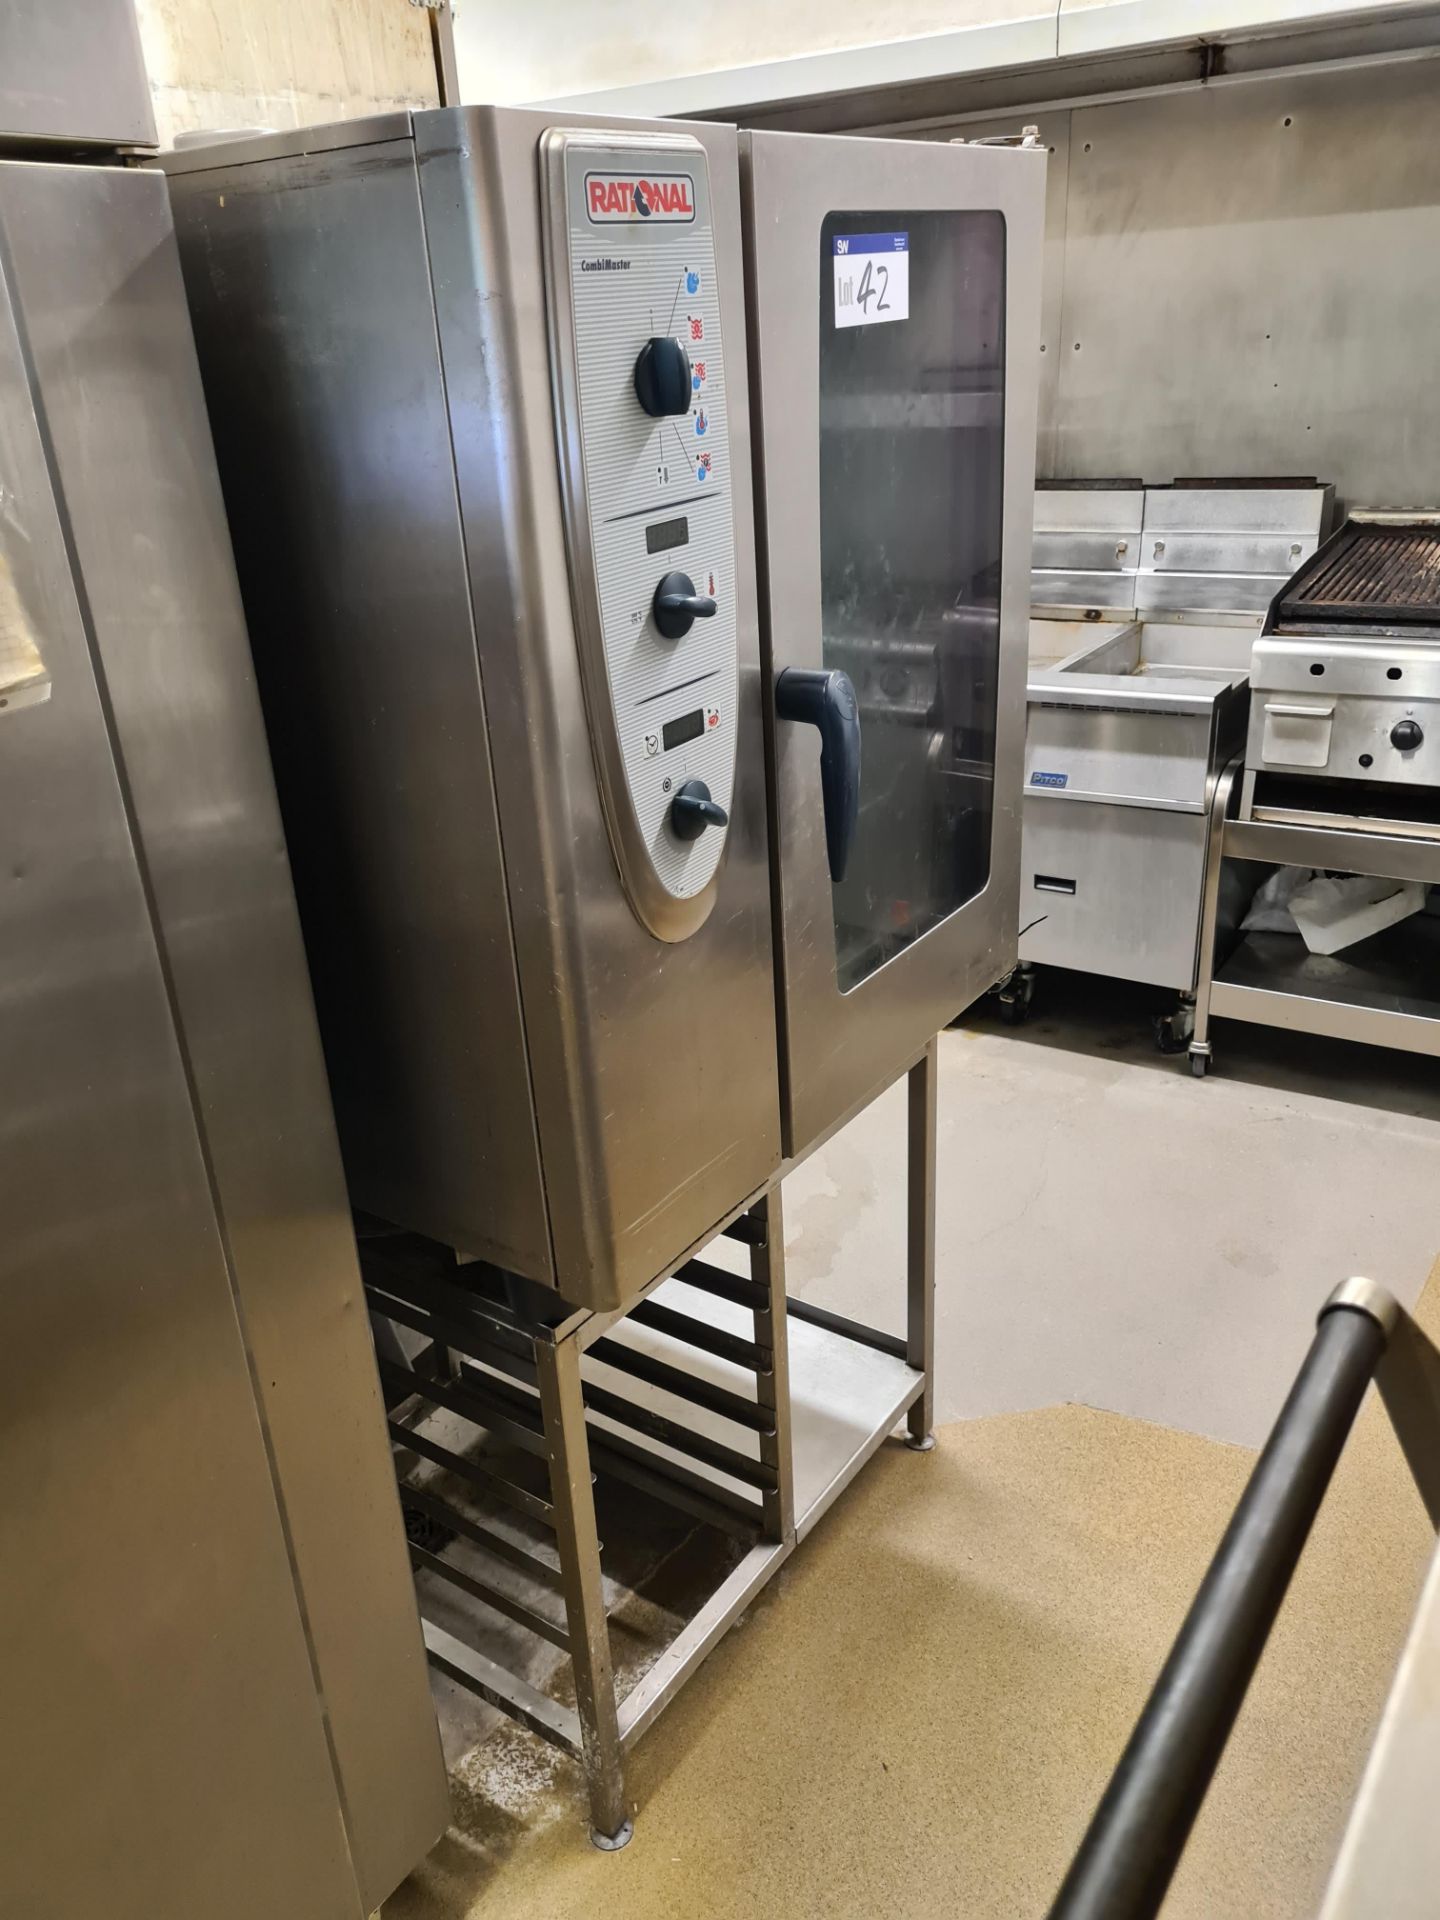 RATIONAL CombiMaster Stainless Steel Combination Oven c/w stand (415v) (Gas Needs Disconnecting - Image 2 of 5